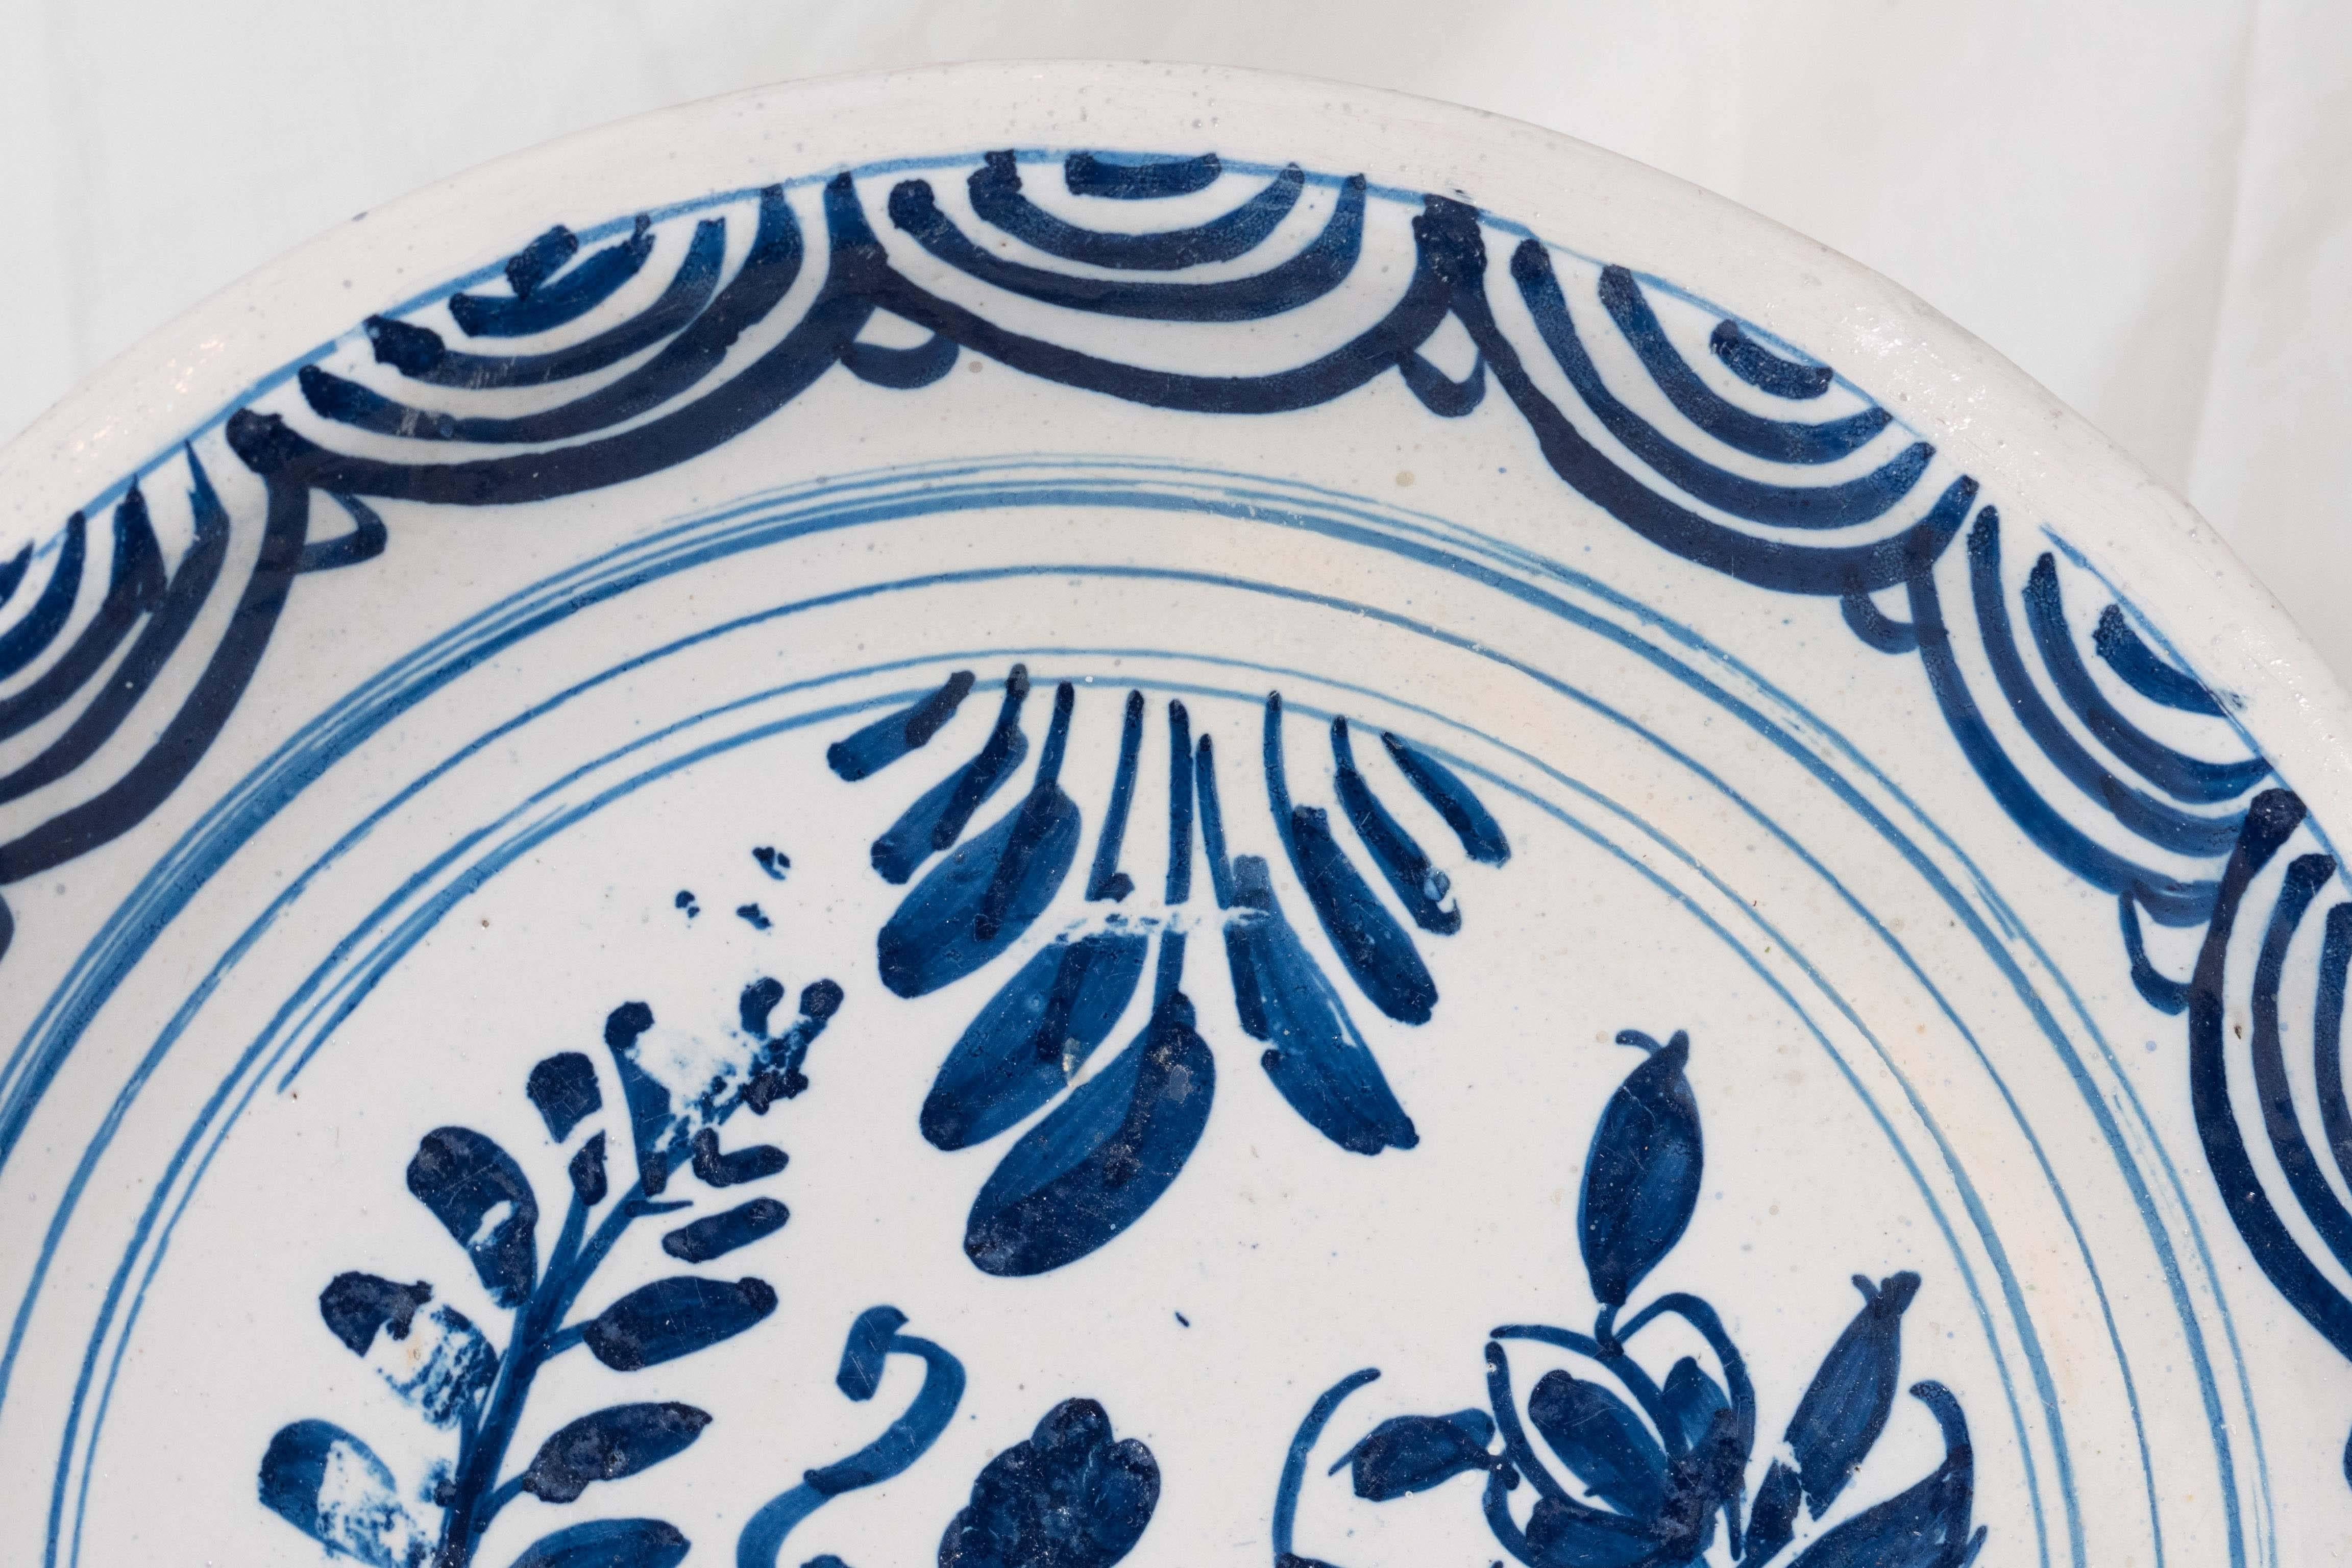 Chinoiserie Blue and White Delft Charger Early 18th Century Netherlands Circa 1720 For Sale